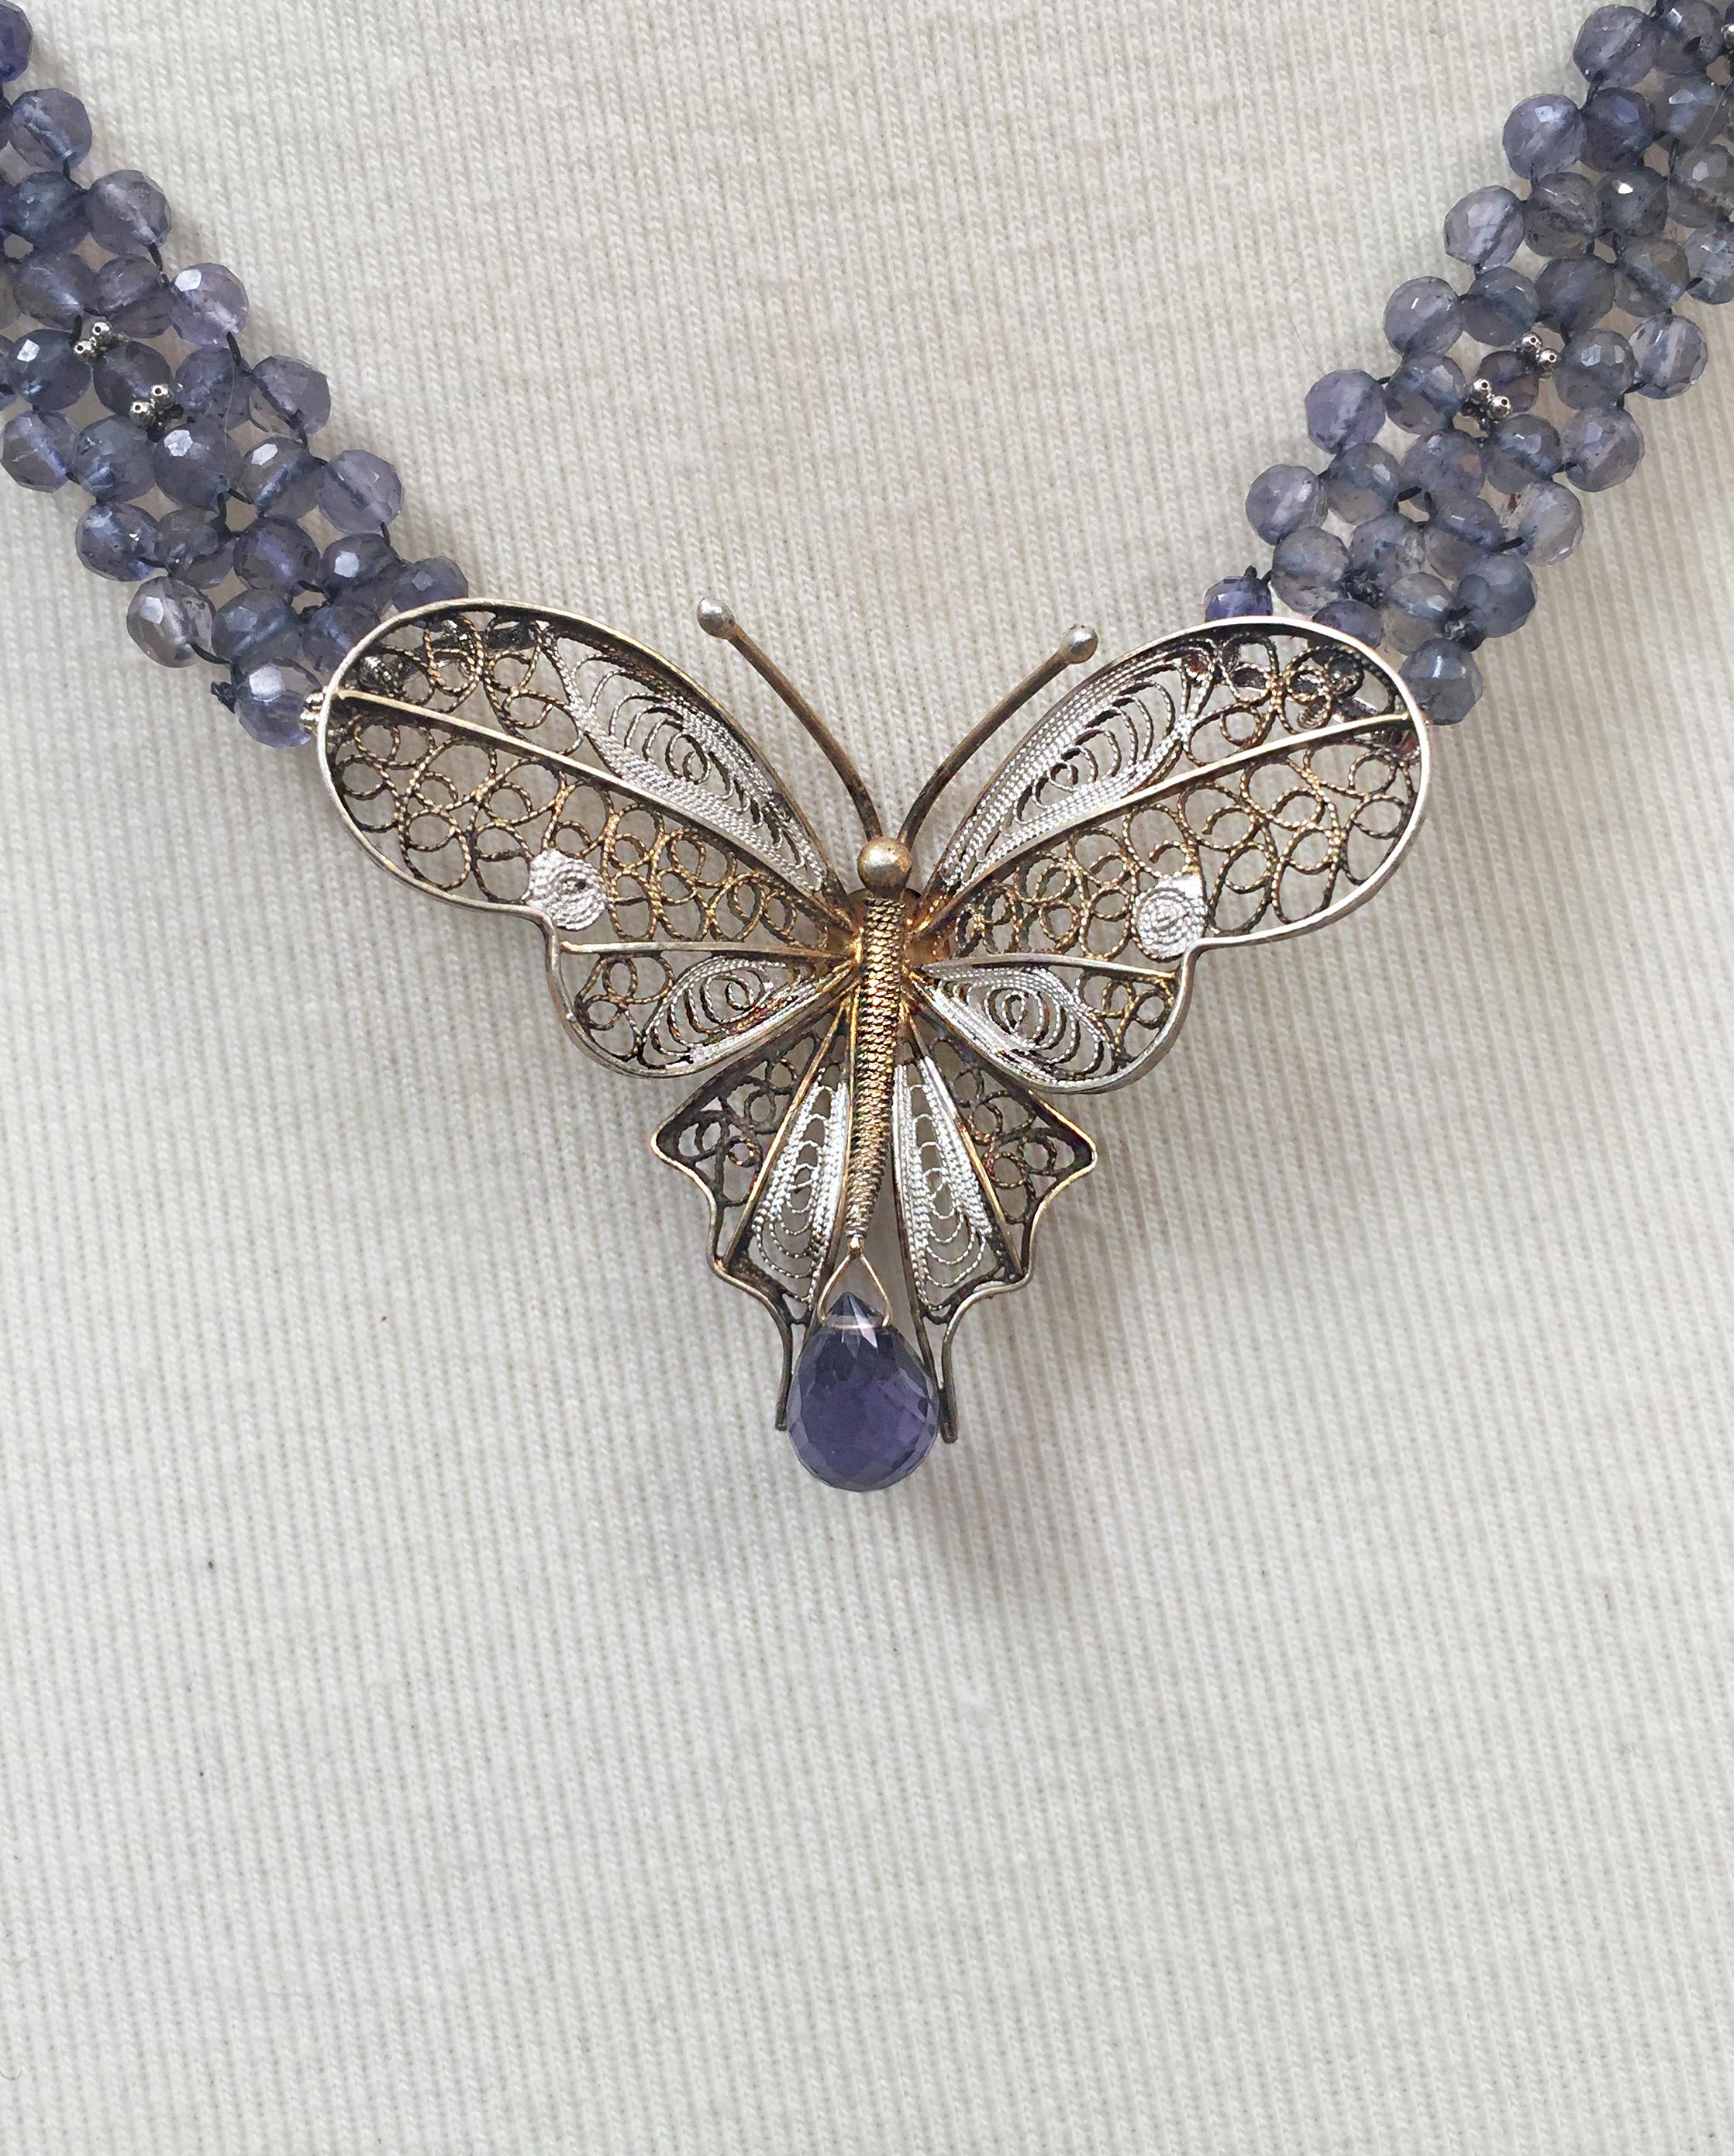 This intricate vintage butterfly brooch is attached to an iolite and 14 k white gold beaded necklace with a white gold clasp. The navy blue of the iolite faceted beads highlights the silver and gold of the vintage butterfly brooch. Shining in